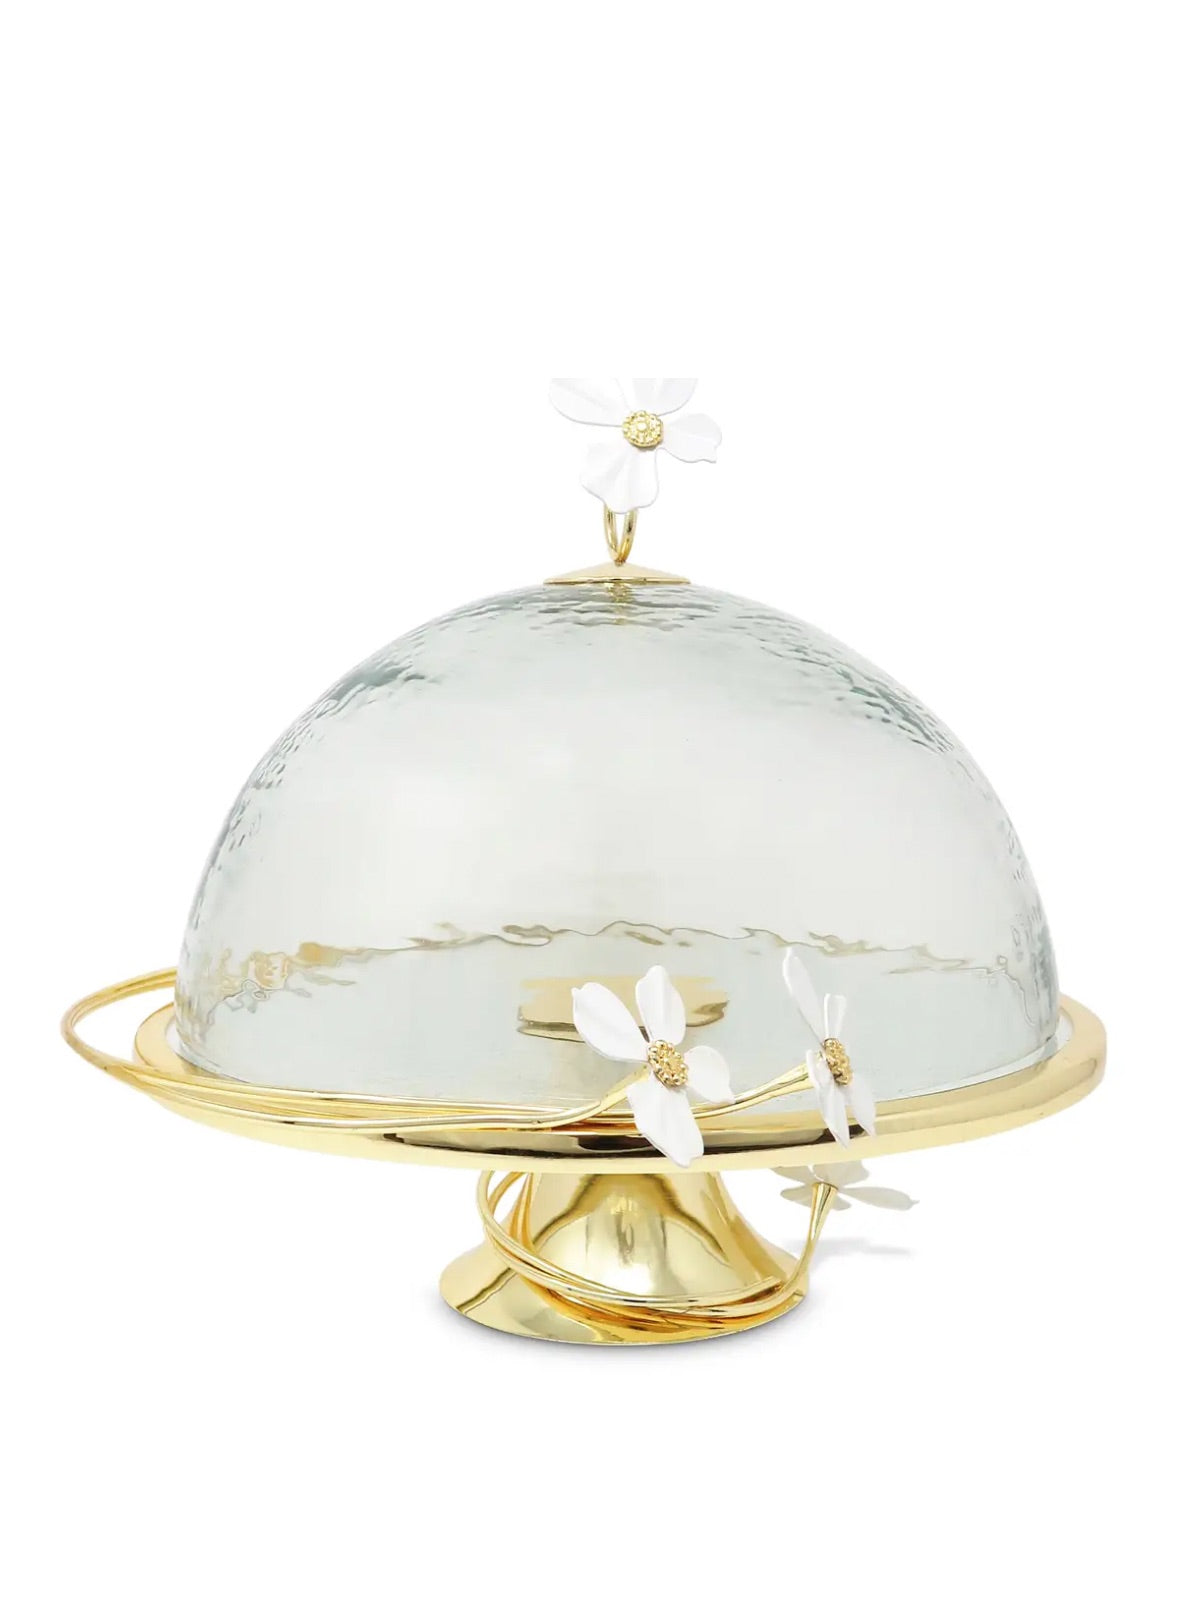 Gold Cake Stand with Glass Cover and Jewel Flower Embellishment - Sold by KYA Home Decor.